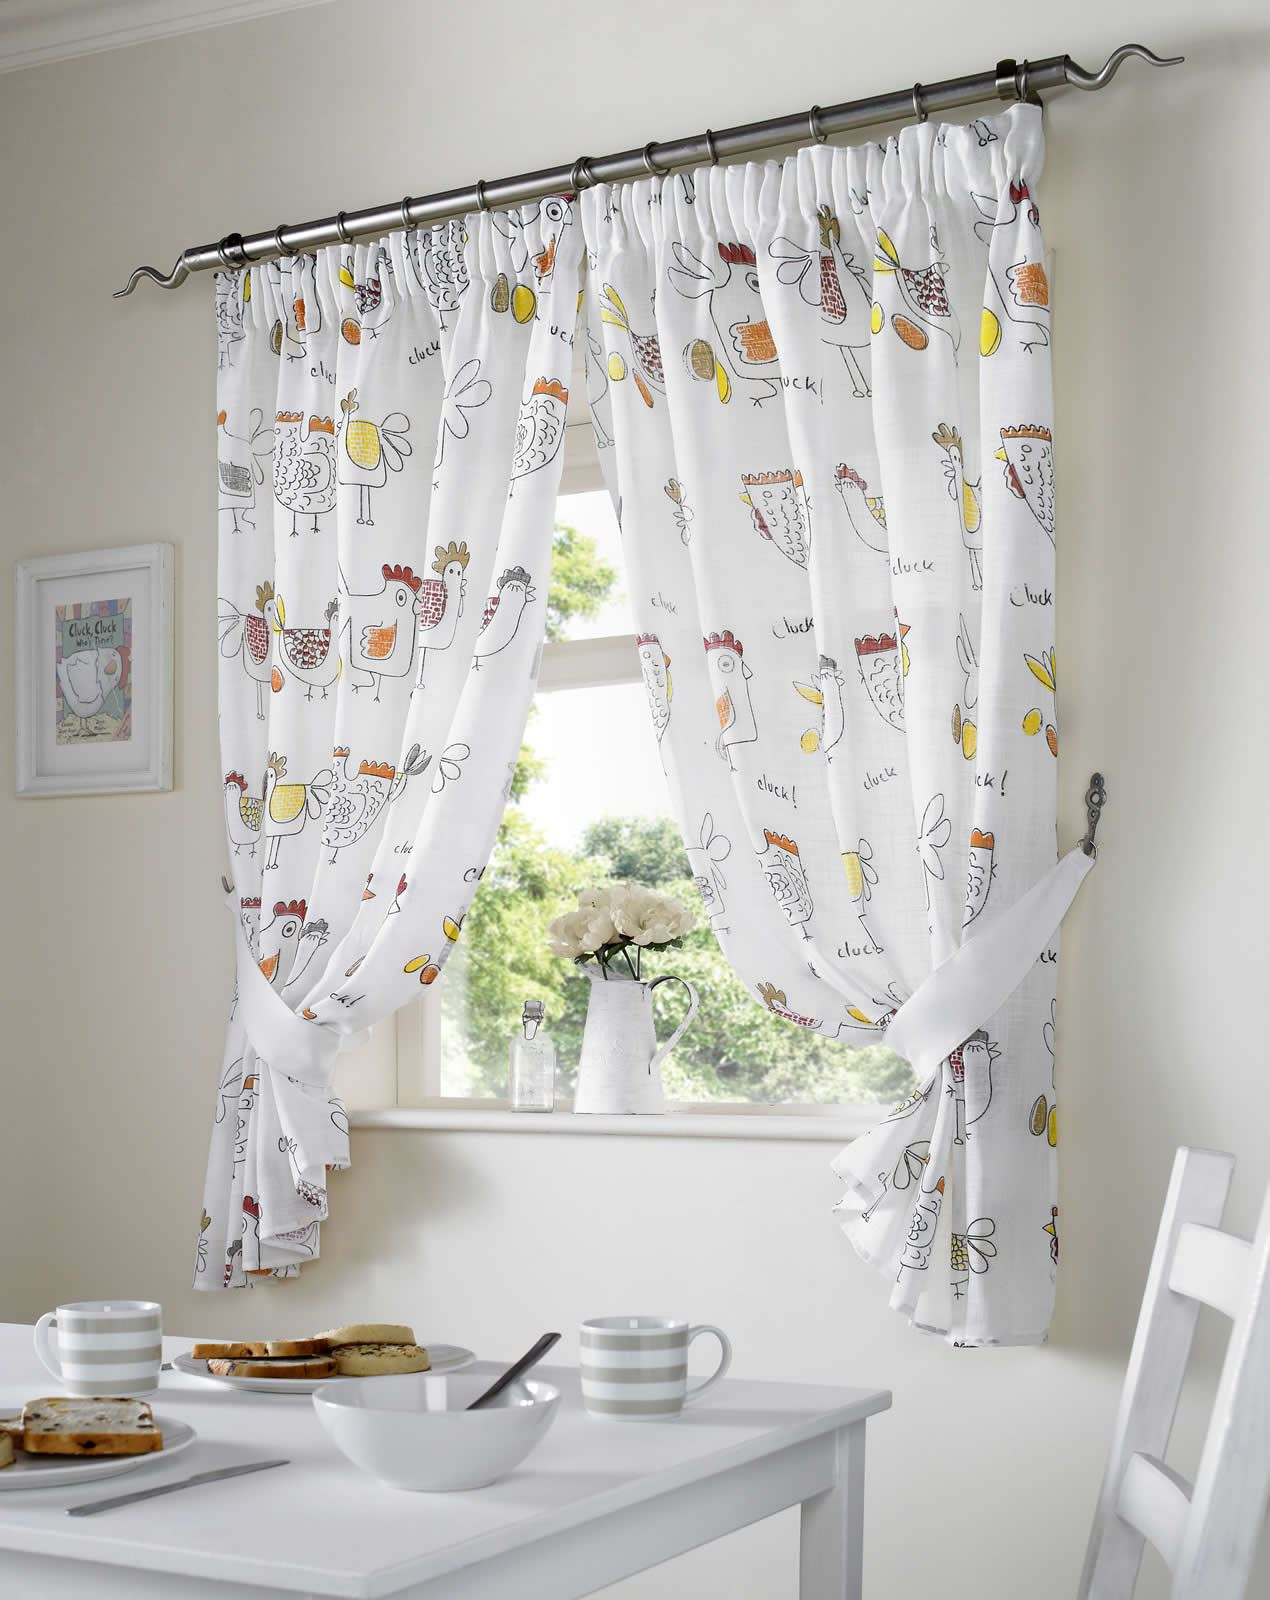 Rooster Kitchen Curtain
 CHICKENS ROOSTER COUNTRY STYLE KITCHEN CURTAIN SET WINDOW